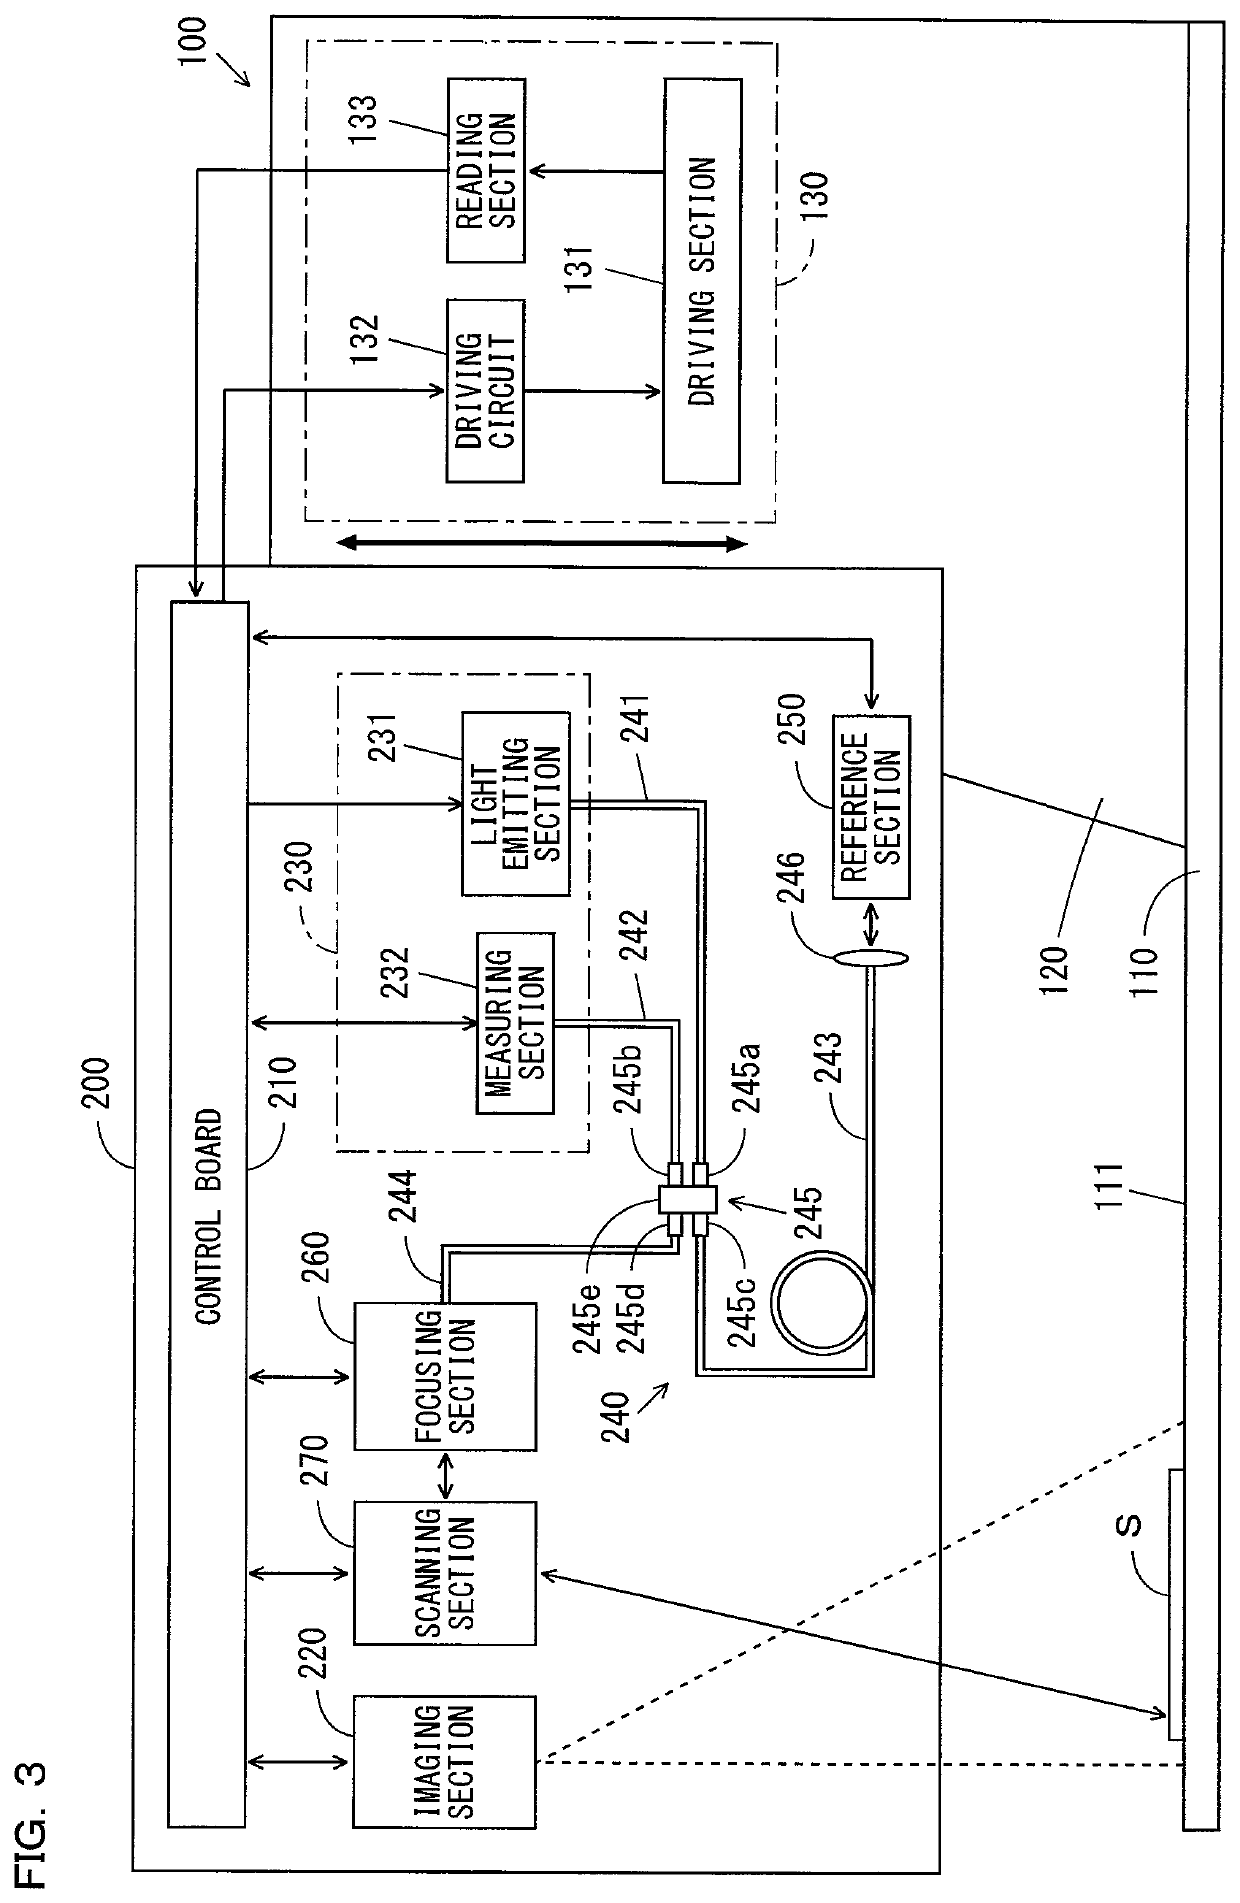 Optical-scanning-height measuring device